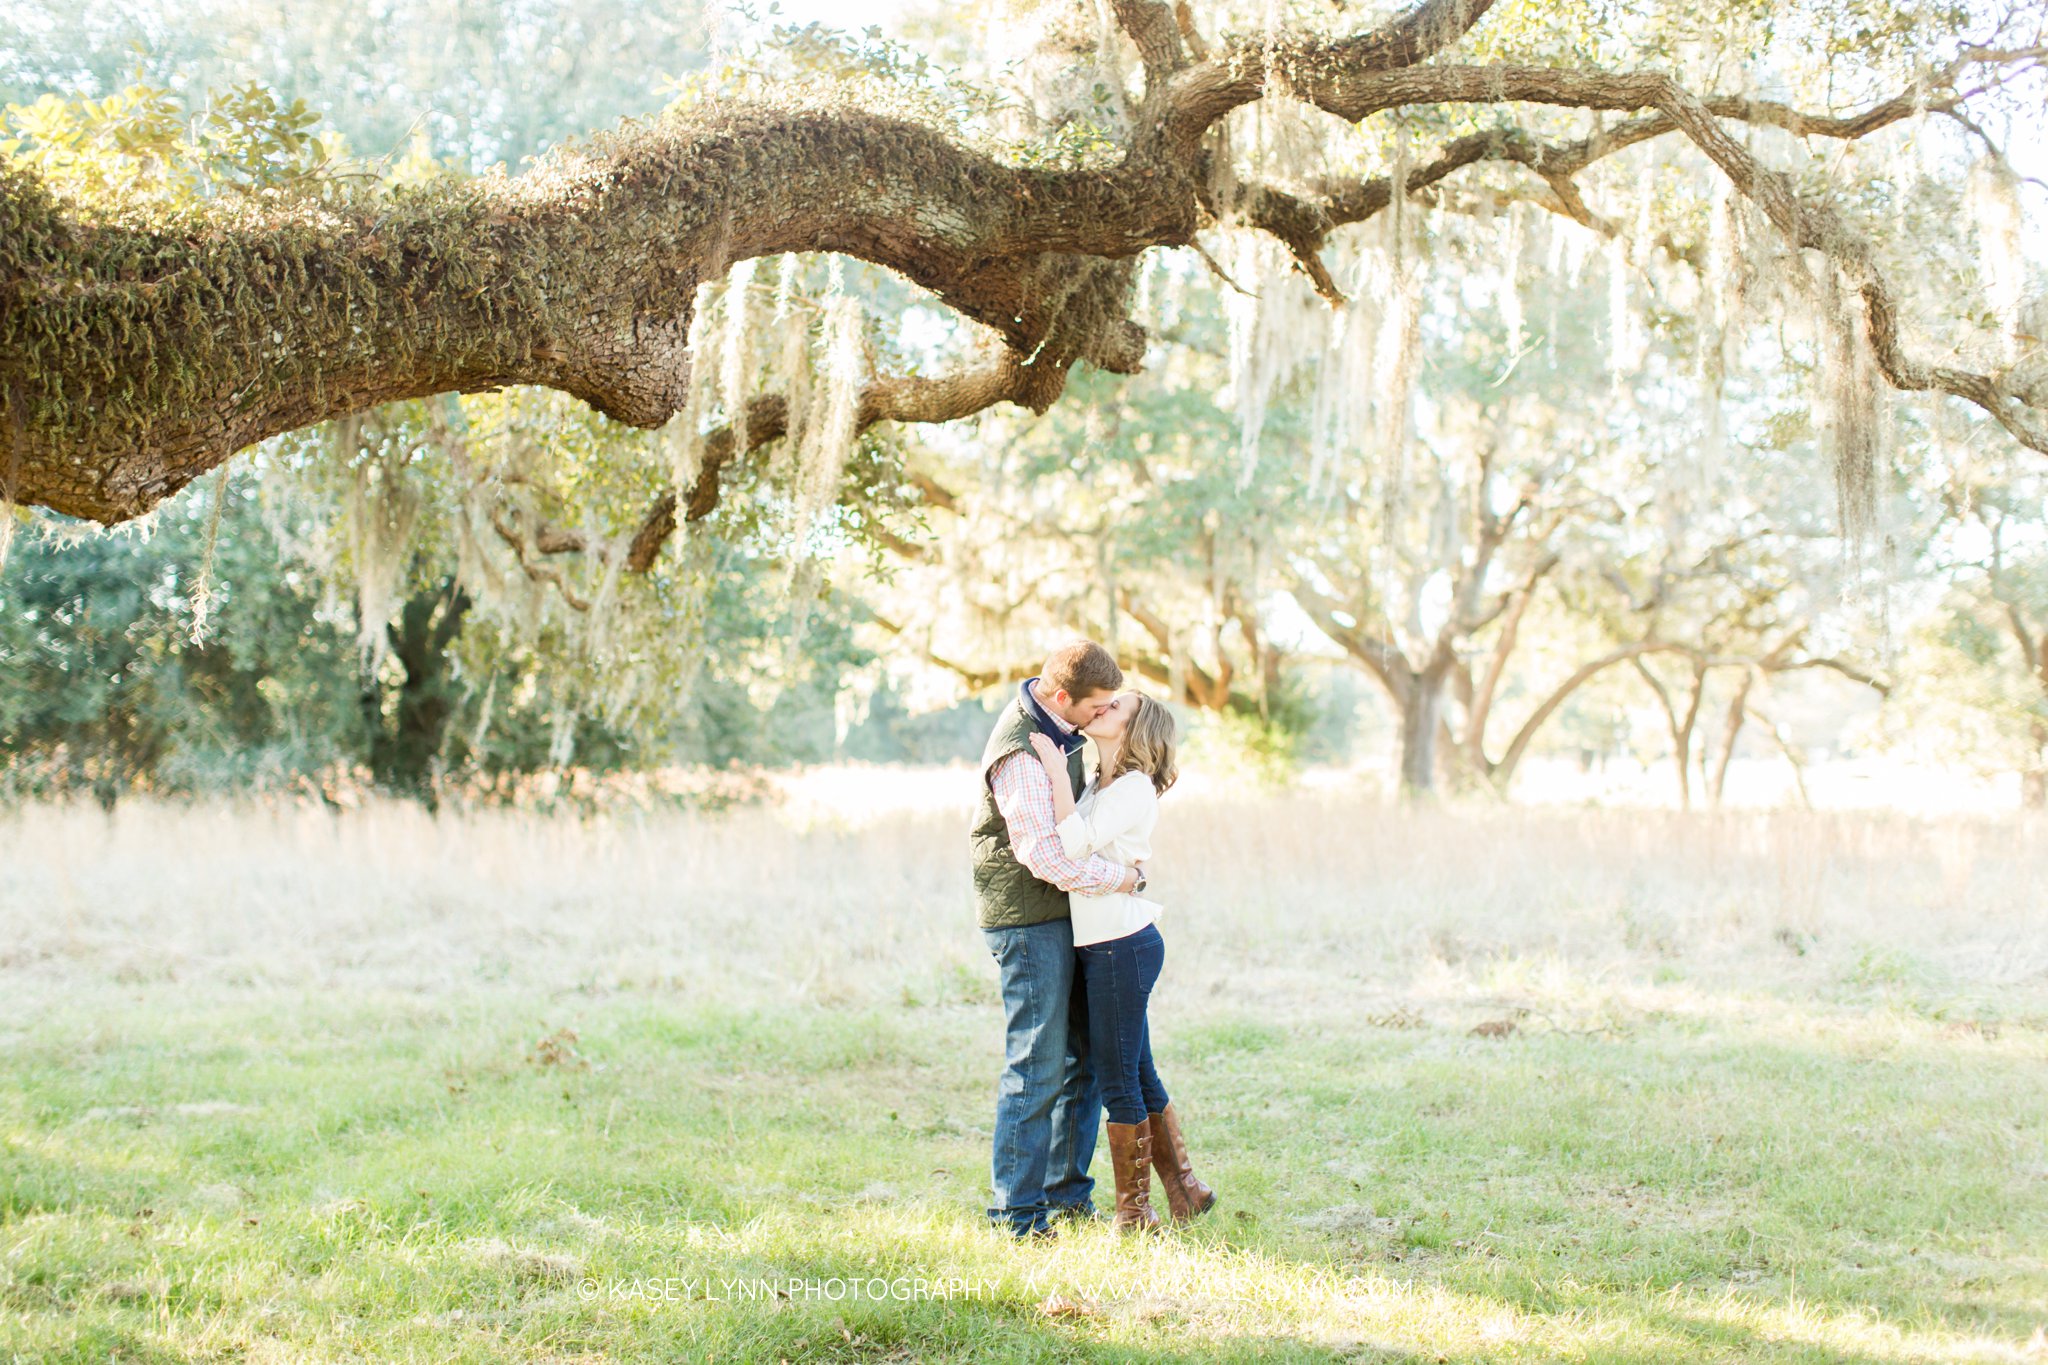 Moss Trees Engagement Session / Kasey Lynn Photography